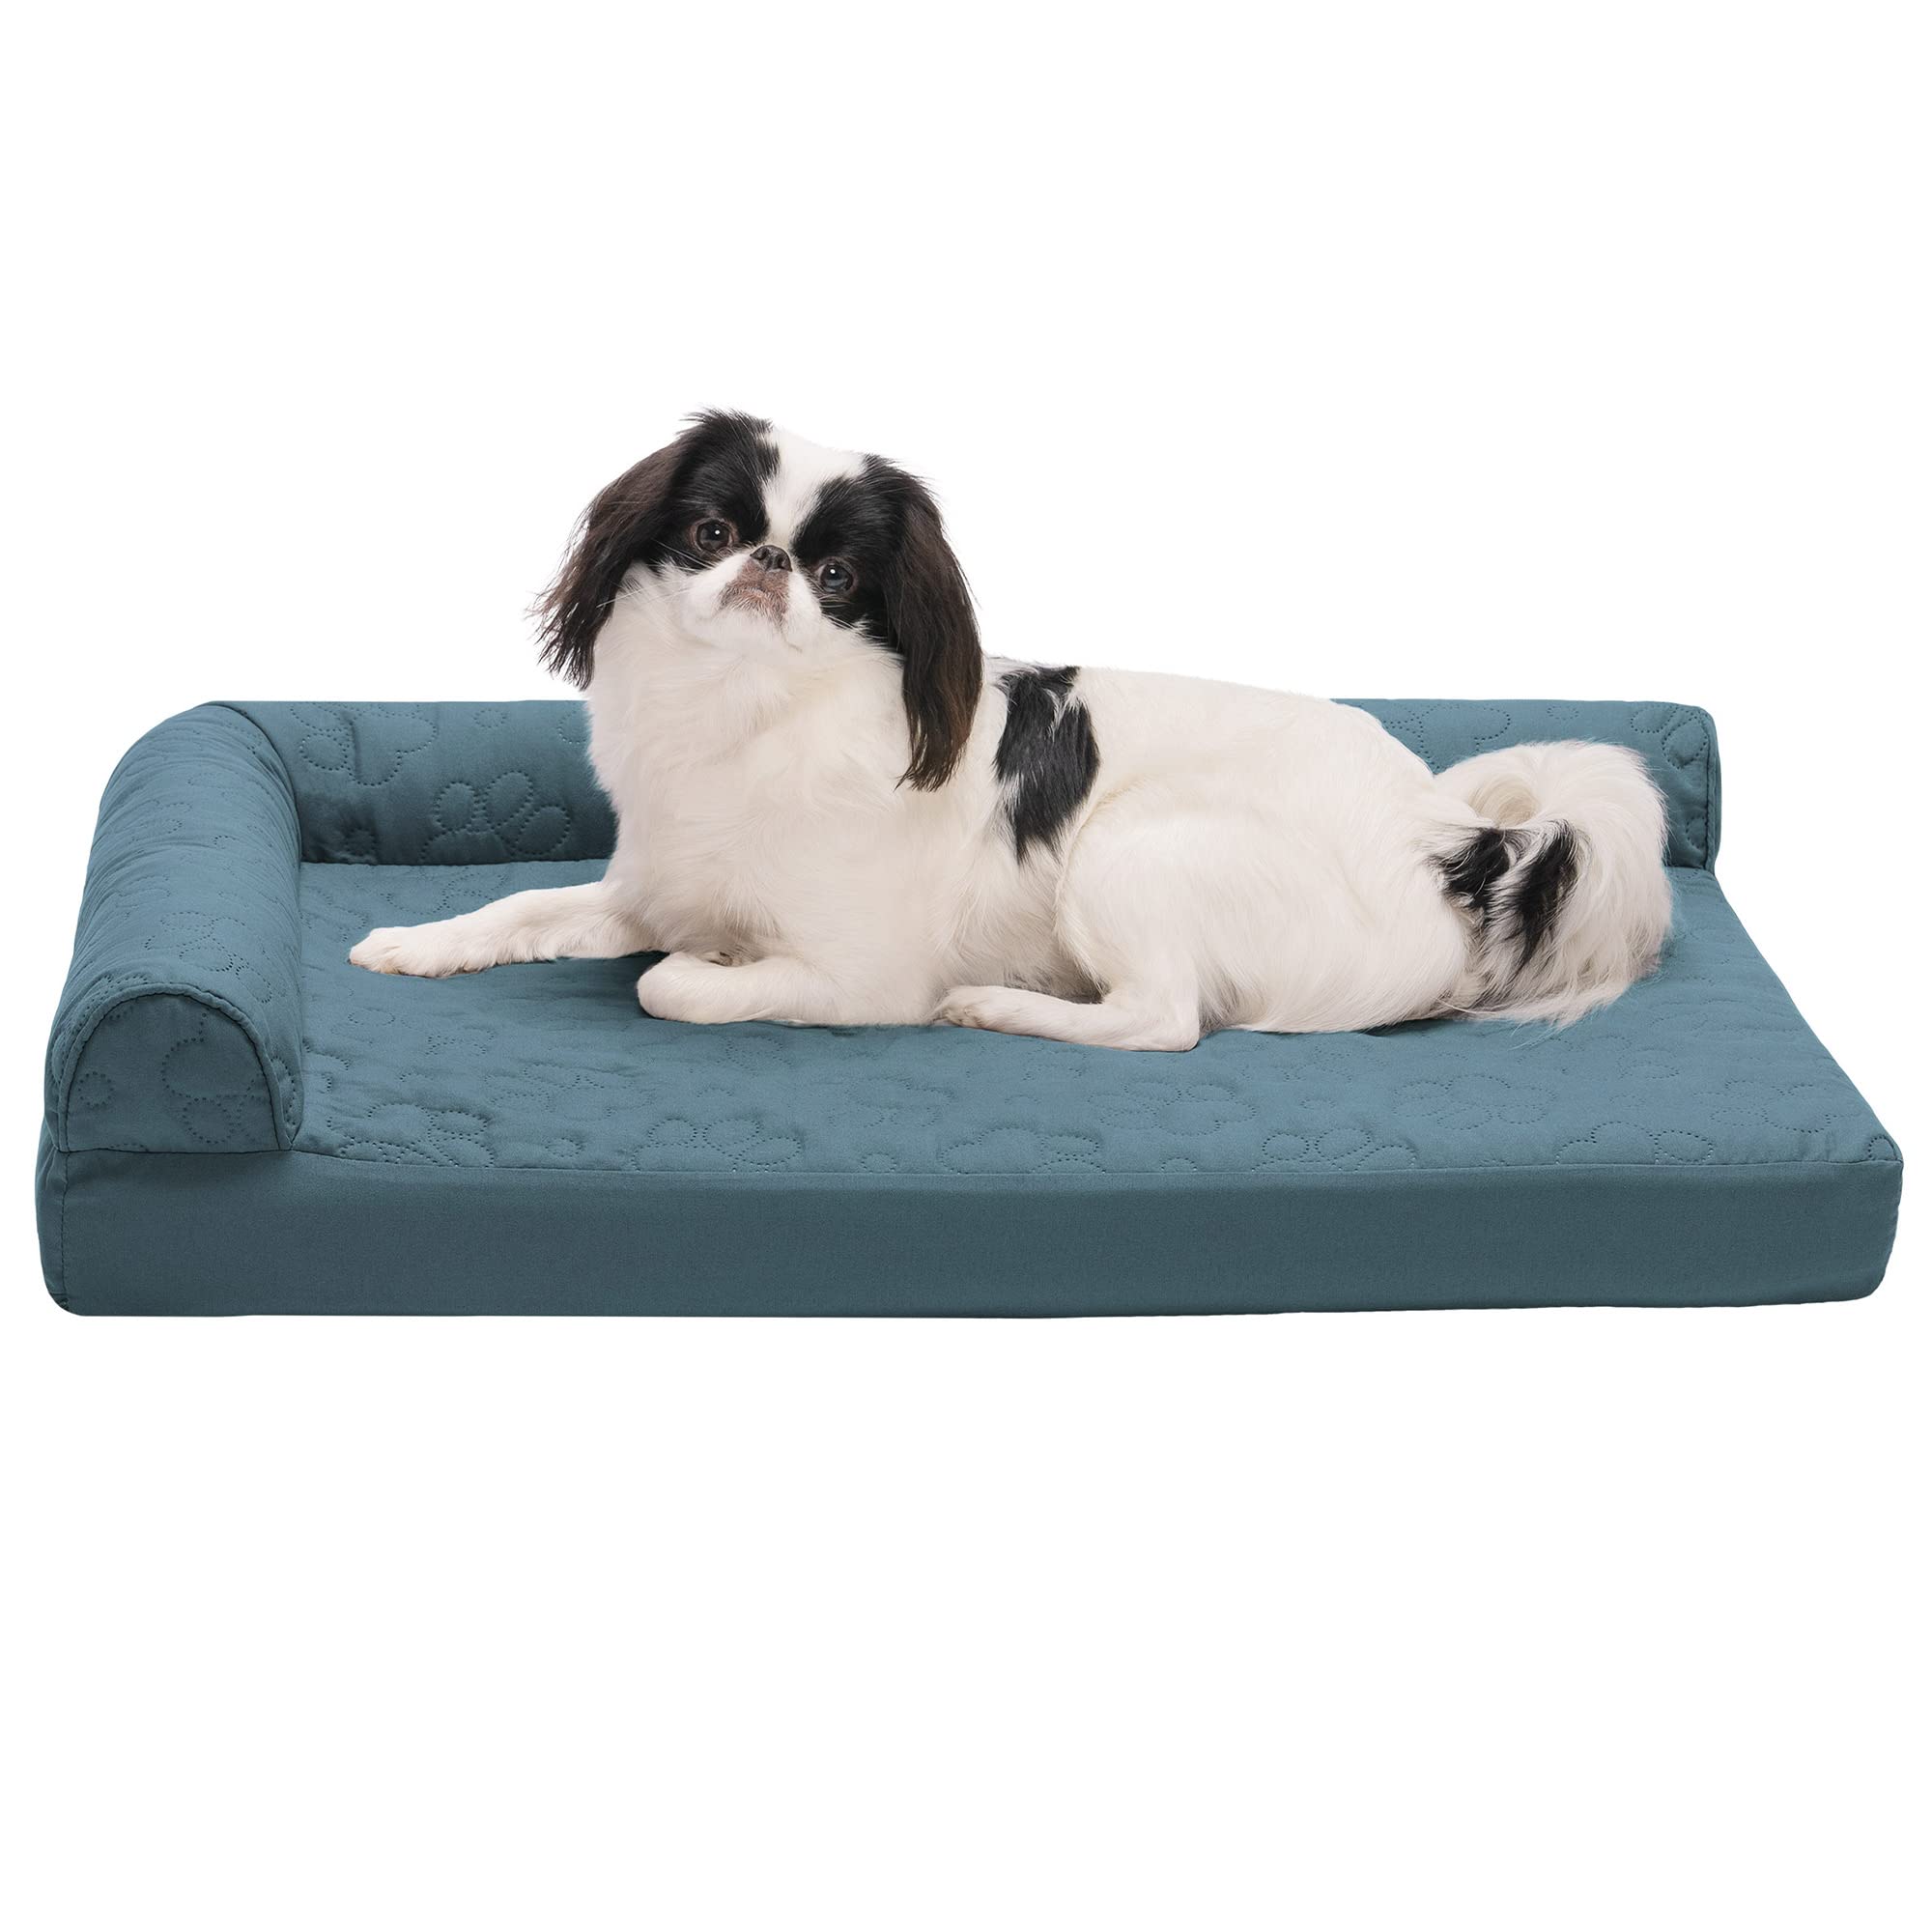 Furhaven Medium Orthopedic Dog Bed Pinsonic Quilted Paw L Shaped Chaise w/Removable Washab'